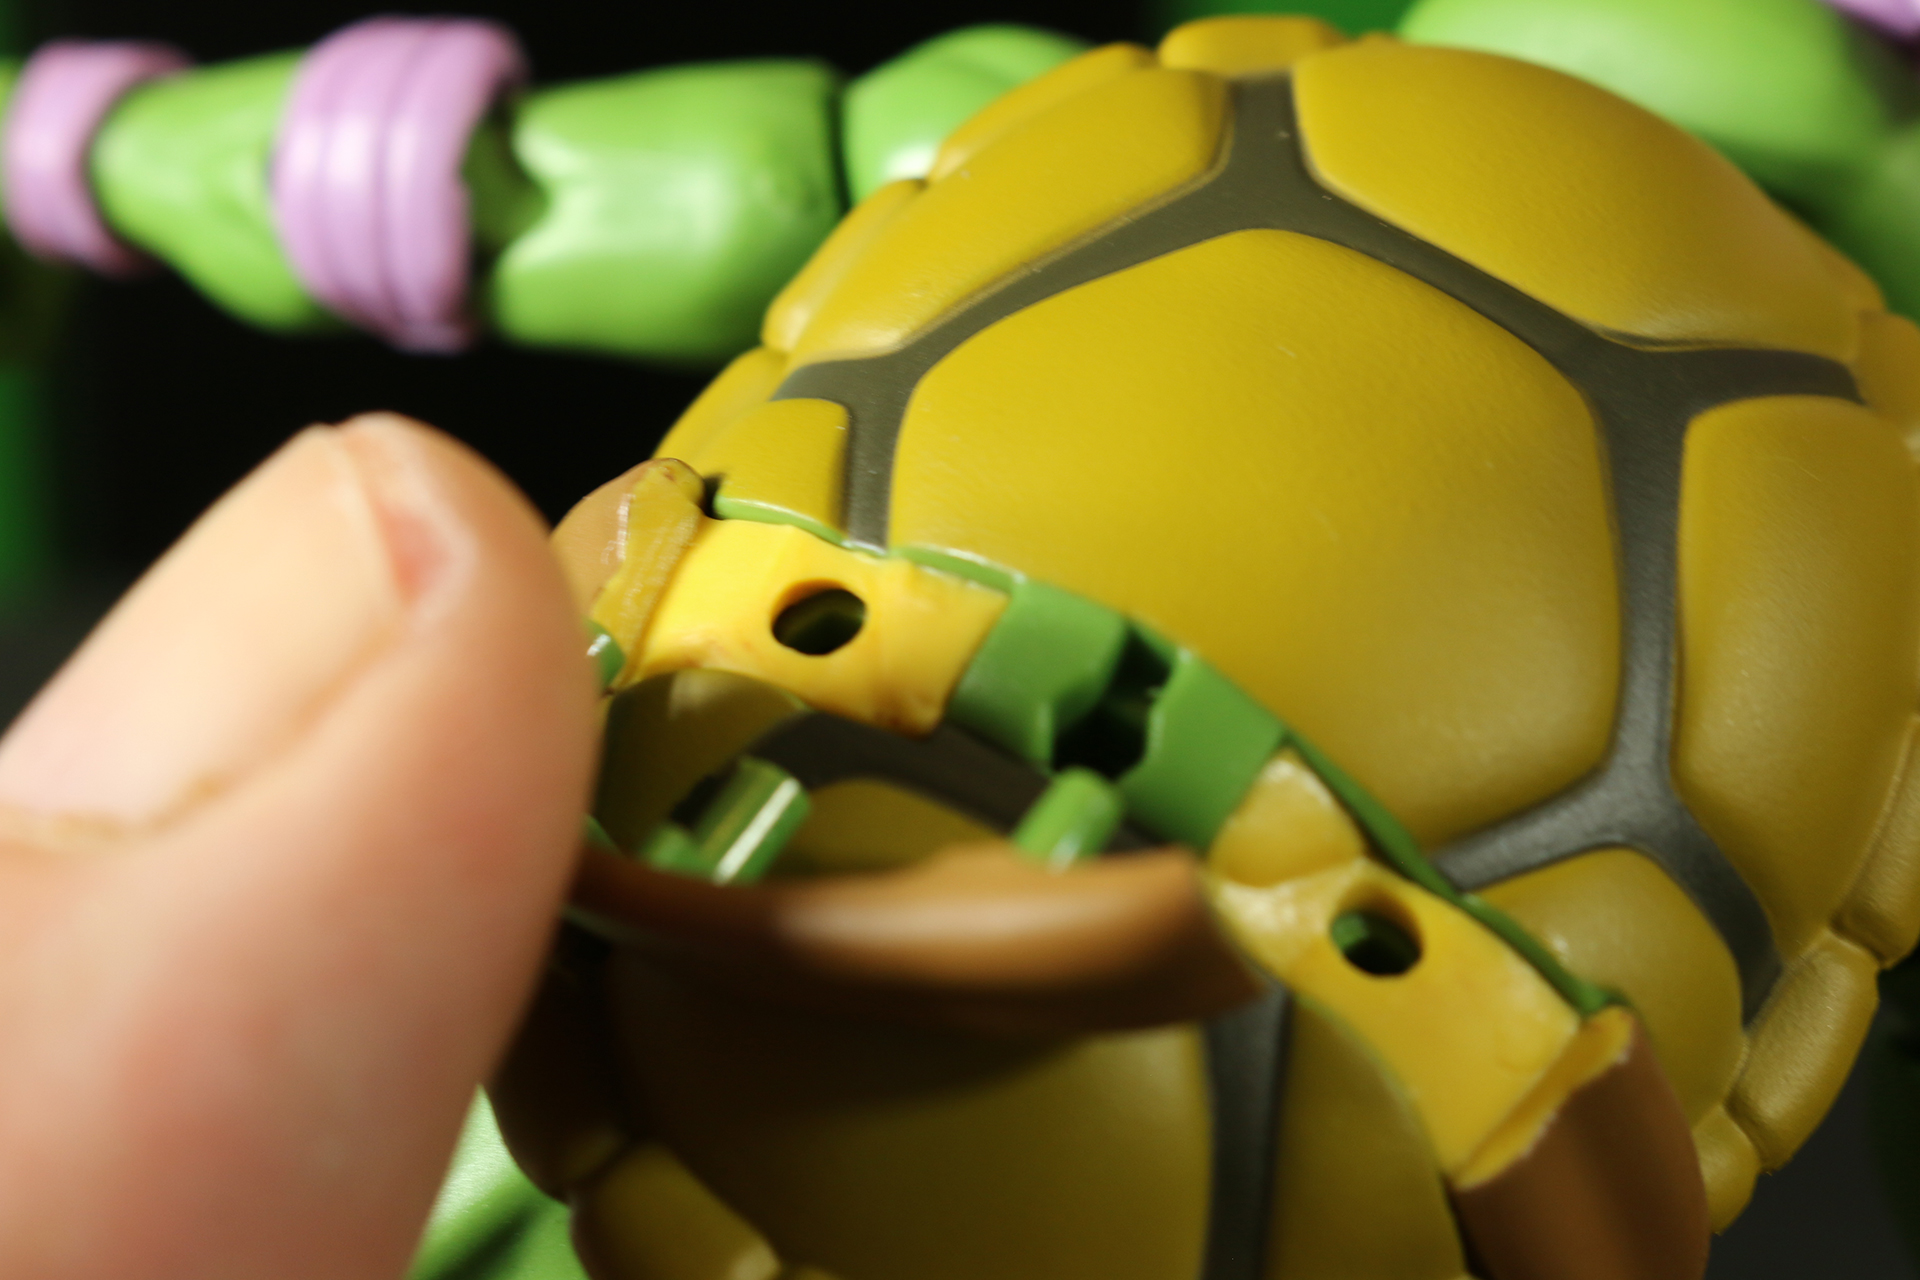 Bandai’s New TMNT Figures Are The Heroes In A Halfshell We Deserve